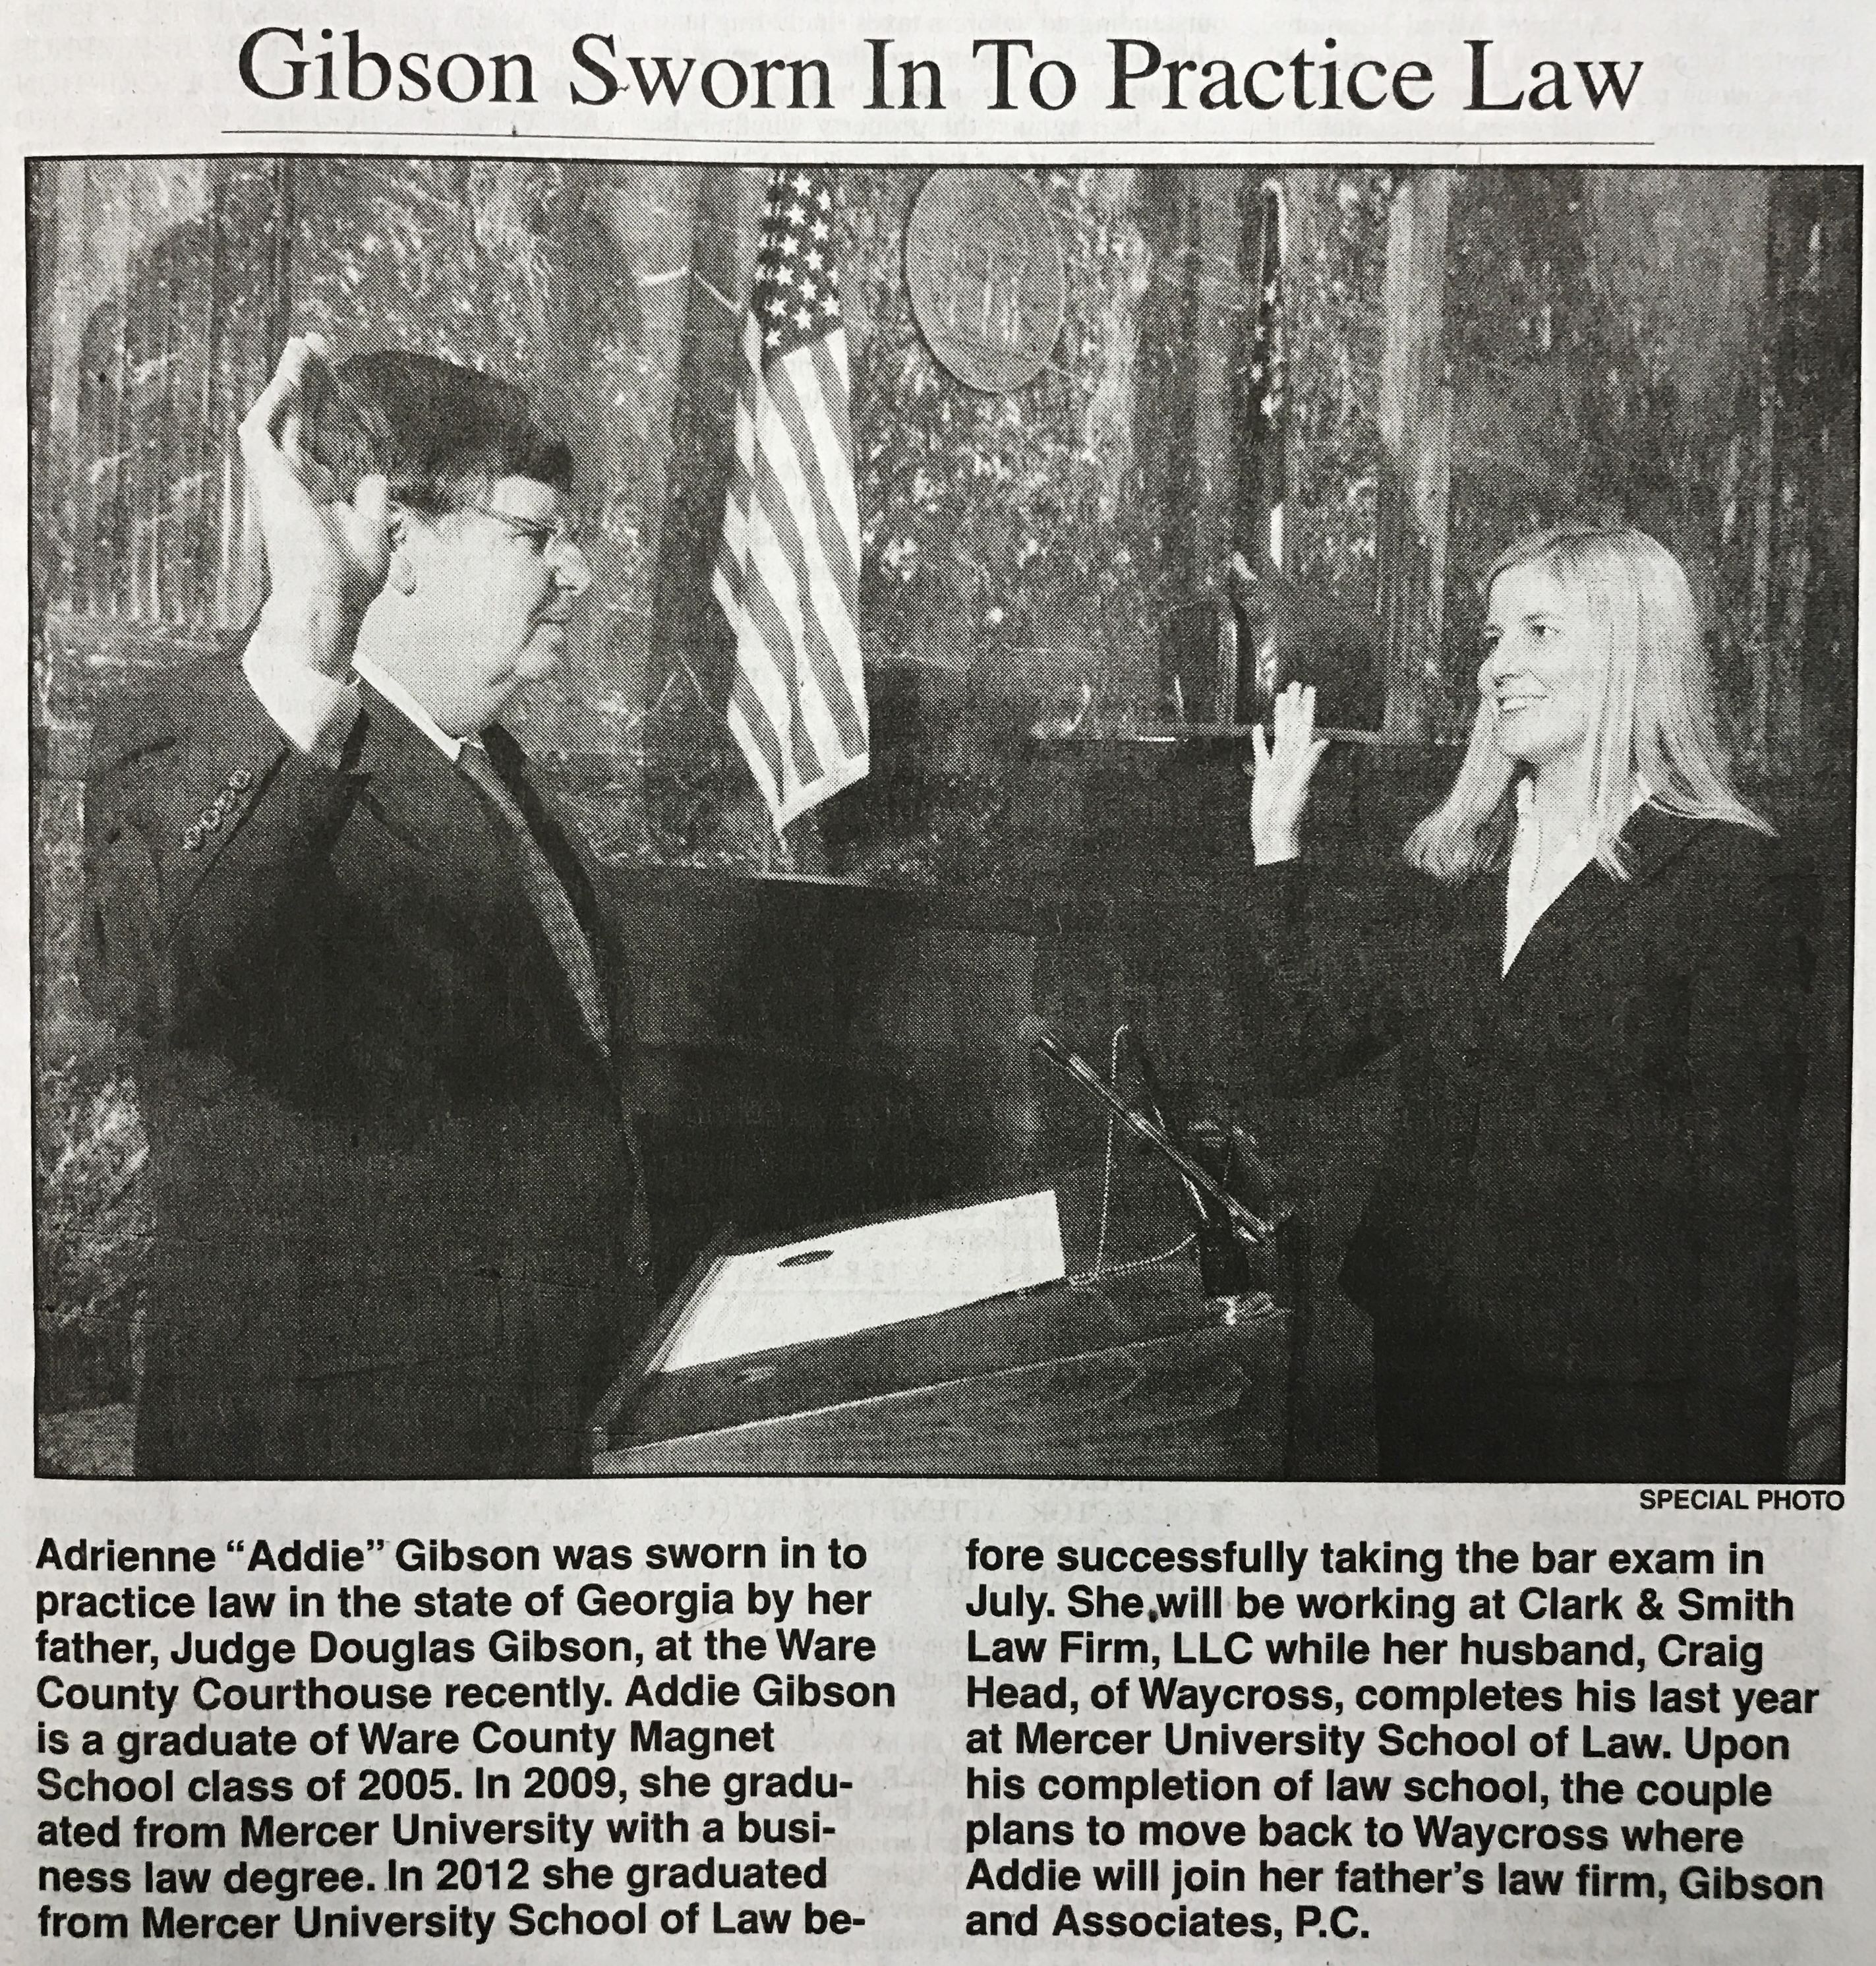 Gibson Sworn In To Practice Law